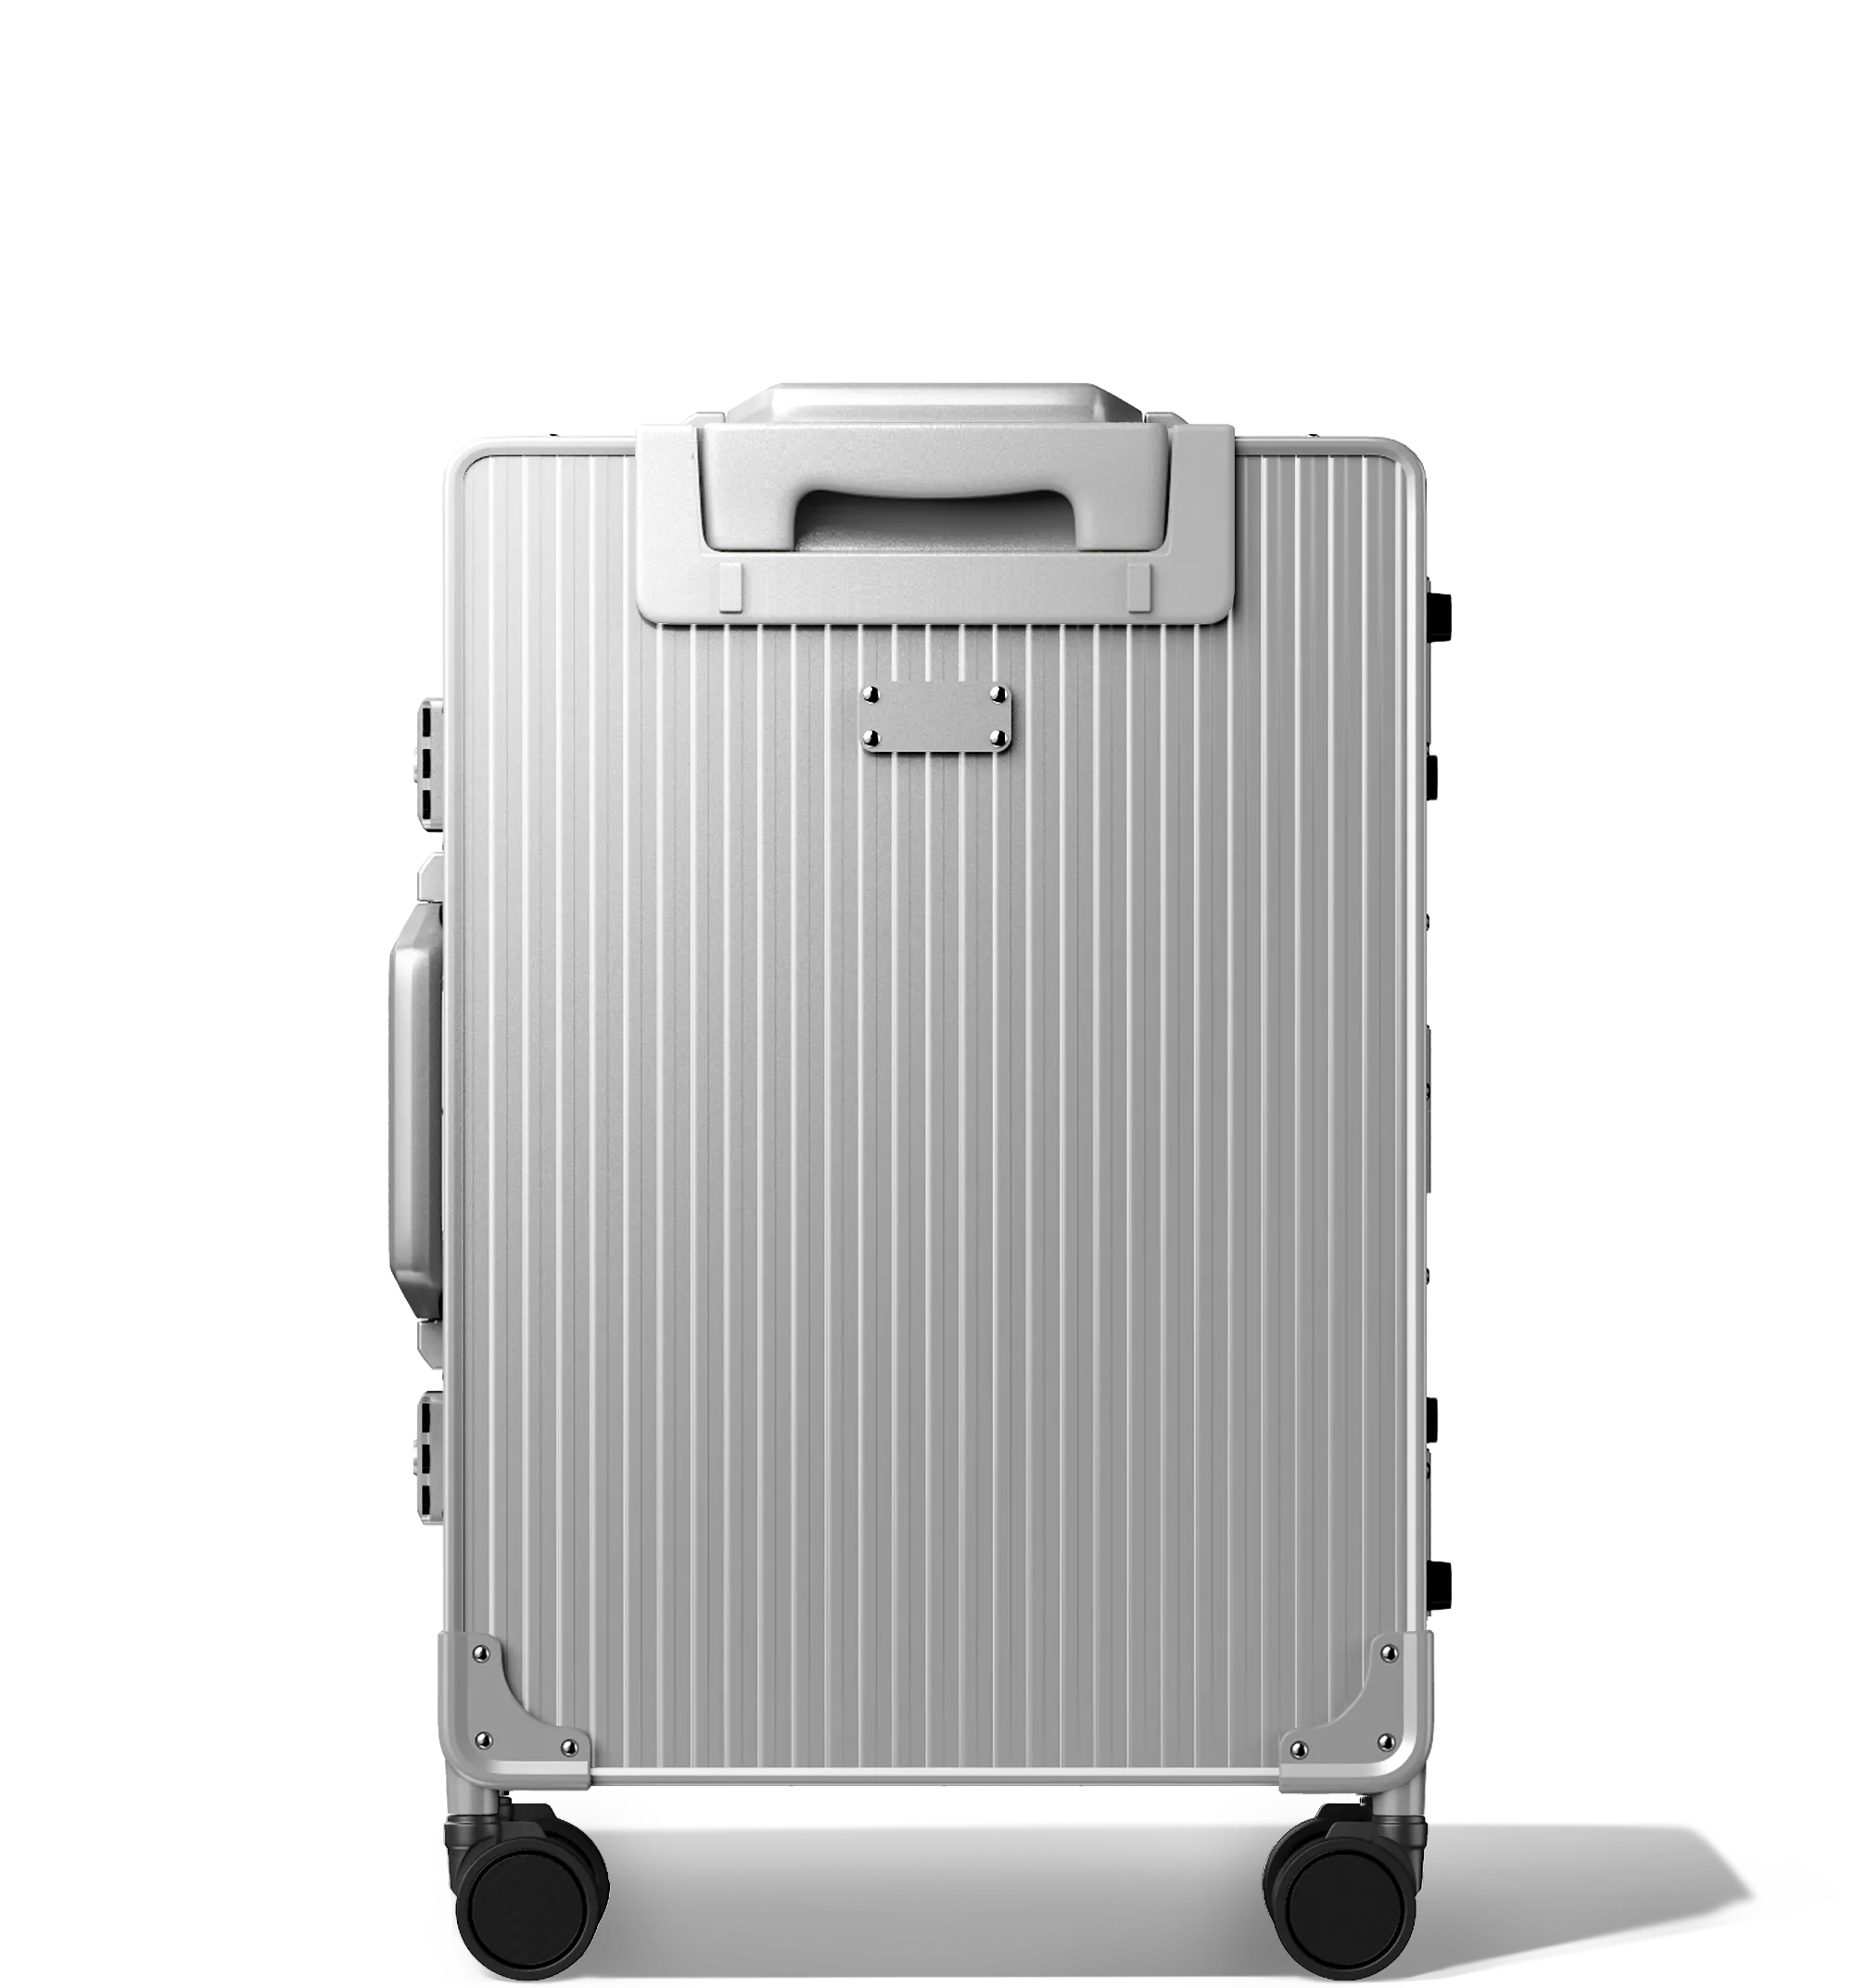 Frontal view of a Silver Cabin in 56/20 , vertical hard-shell aluminium Luggage with ribbed texture, featuring a top handle, side latches, and four multi-directional spinner wheels, against a white background.